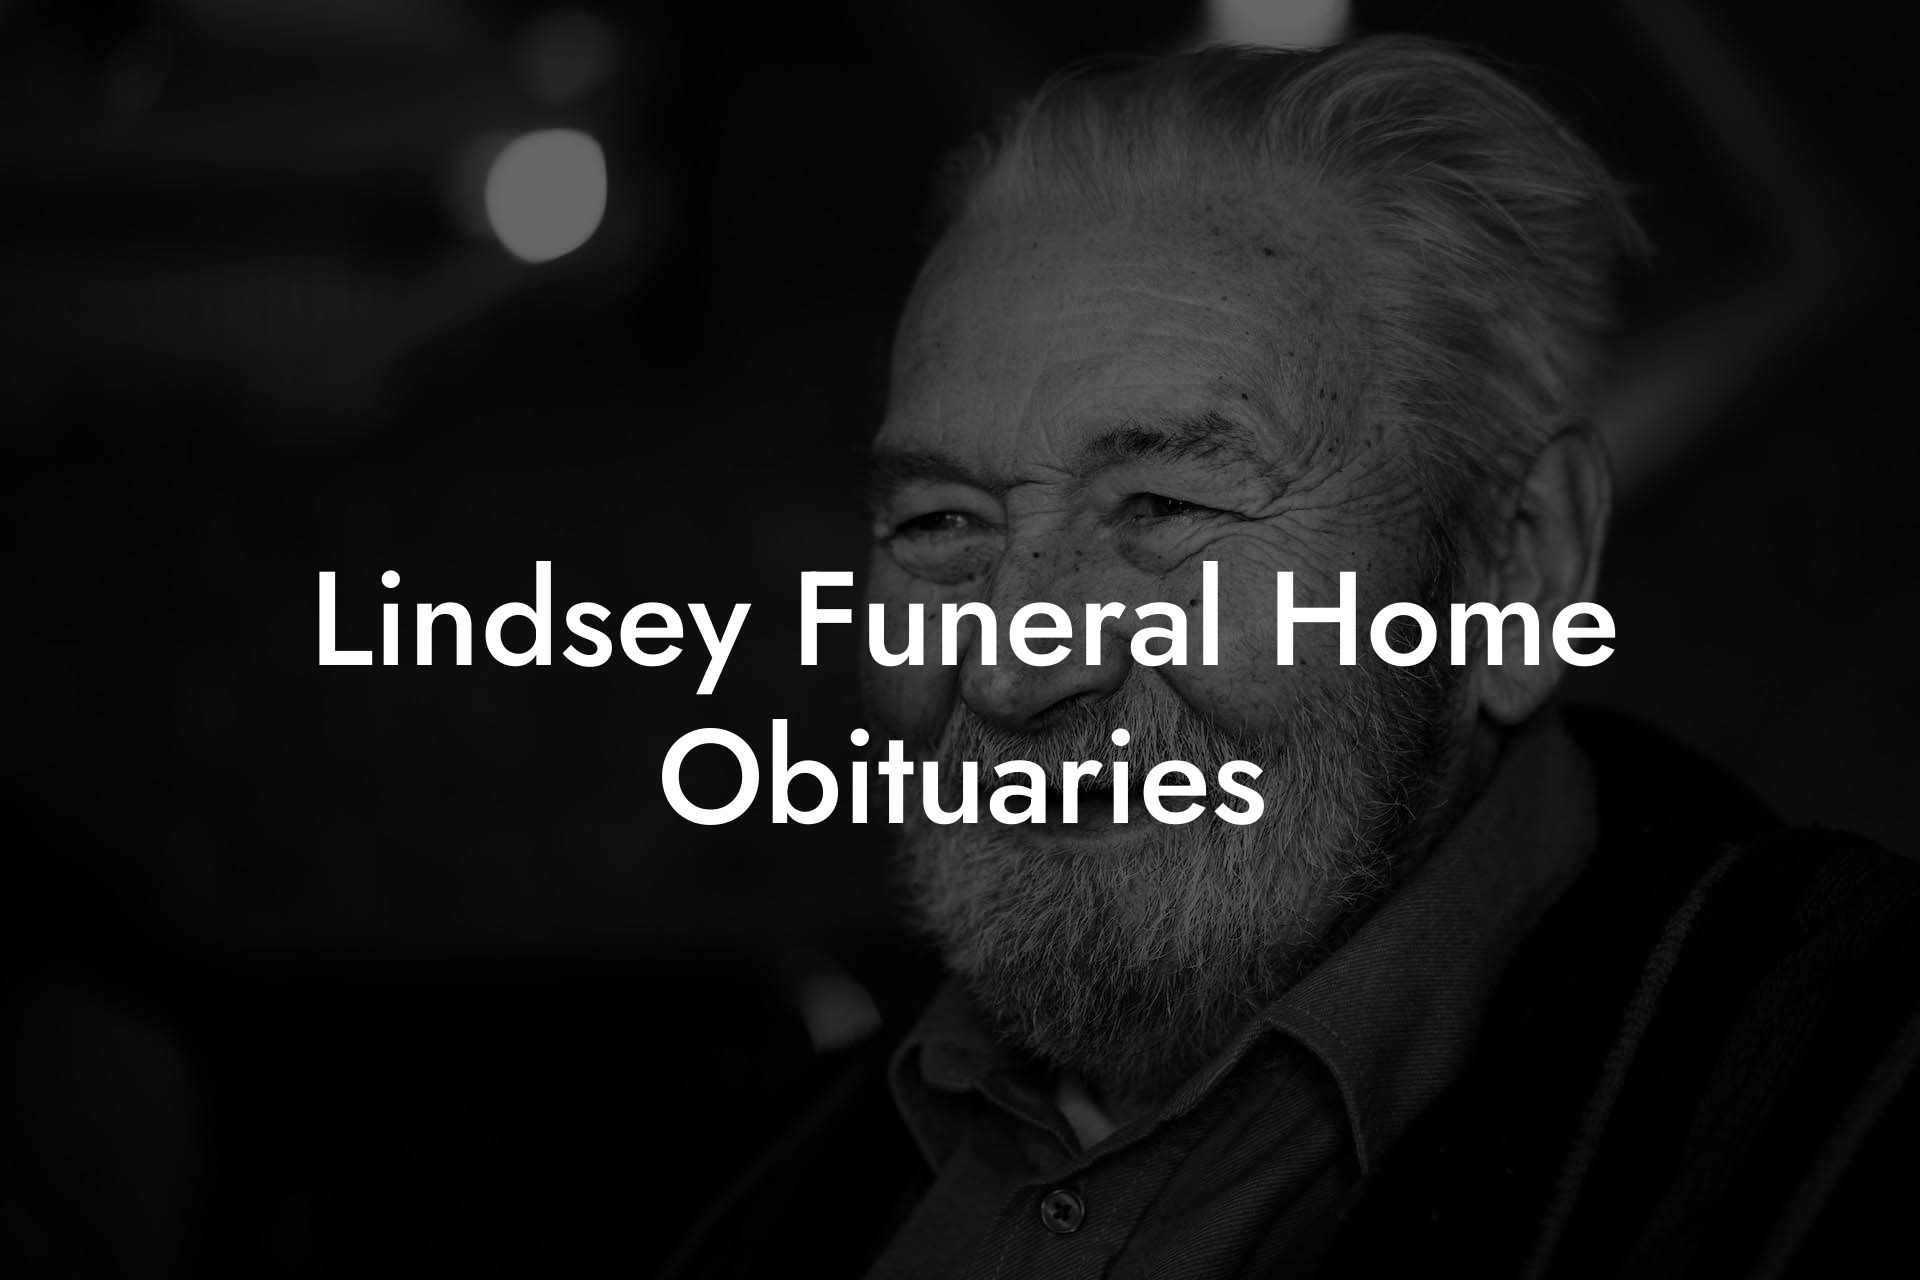 Lindsey Funeral Home Obituaries